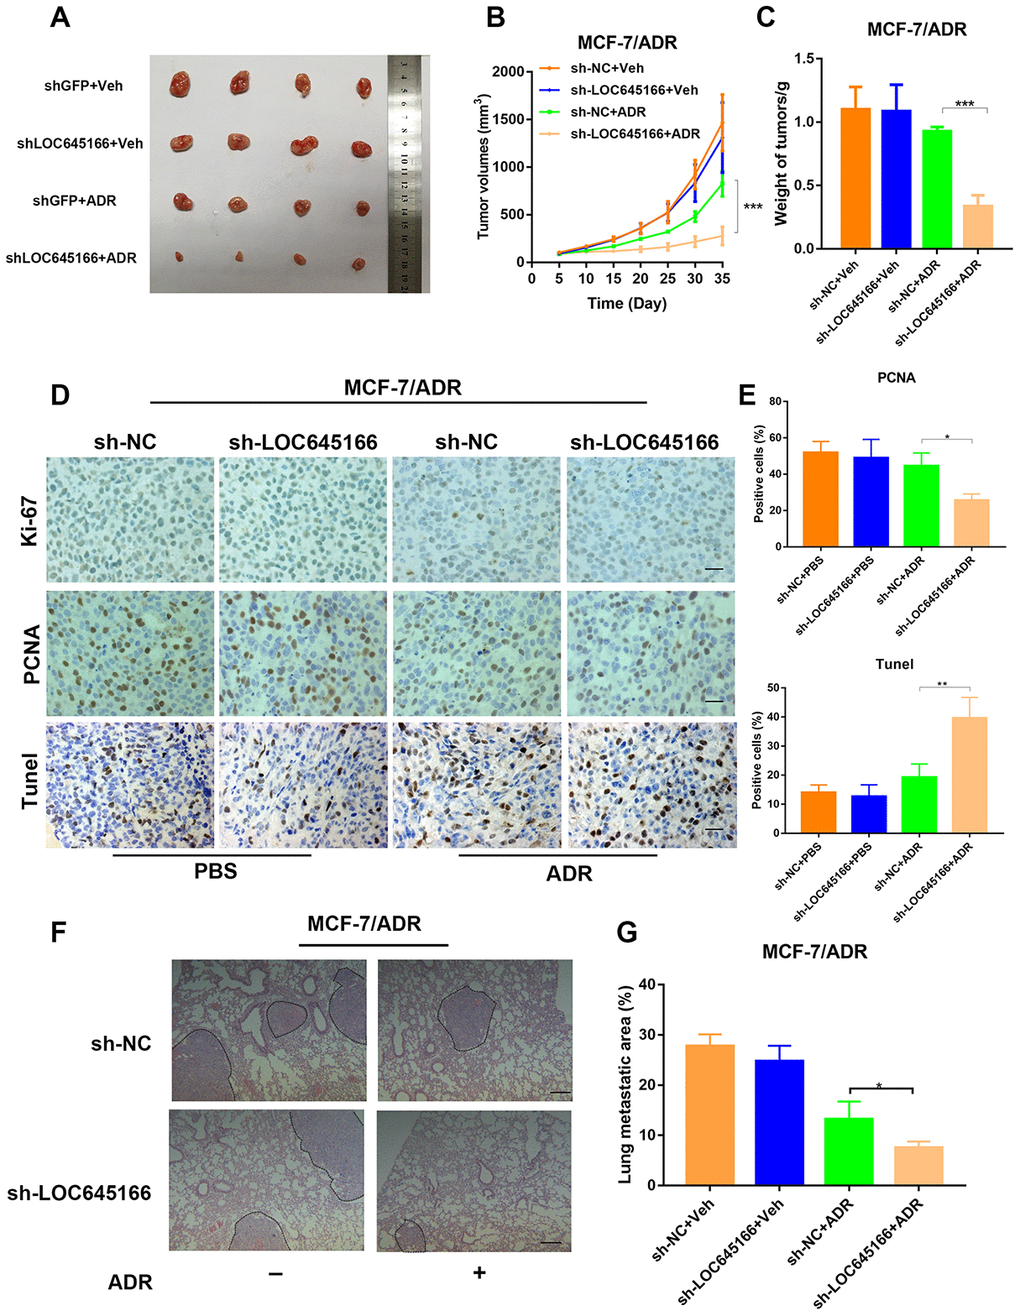 Inhibition of lnc-LOC645166 suppresses the growth and metastasis of ADR-resistant breast cancer cells in vivo. (A) Nude mice were subcutaneously xenografted with transfected lnc-LOC645166 knockdown and control adriamycin resistance breast cancer cells (MCF-7/ADR) and intraperitoneally injected with adriamycin every other day. Representative images of tumors and tumor volumes are shown. (B)Tumors derived from cells transfected with sh-LOC645166 or sh-NC were measured under a condition with PBS or adriamycin. Tumor volume was measured. (C) Weight of tumors derived from each group were calculated. (D and E) The tumor sections were subjected to H&E and immunostaining of Ki67 and TUNEL staining. (F) Representative HE images of metastatic lung in each group. Scale bar, 100 mm. (G) lung metastasis areas in each group. The data represented the mean±SD of three independent experiments. *P